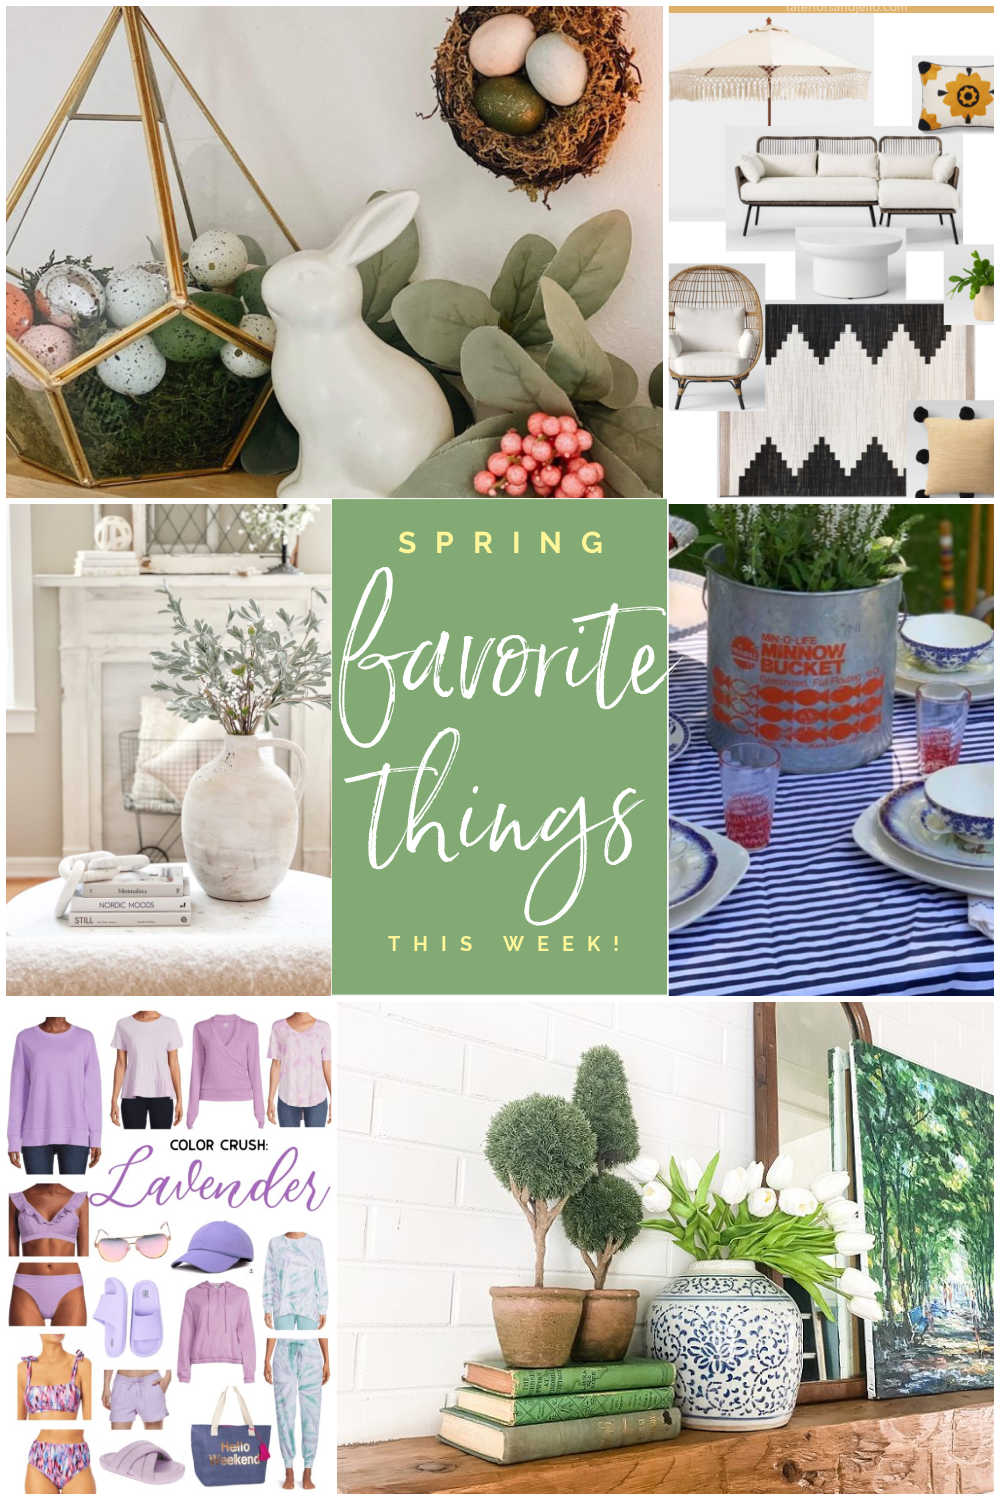 Favorite Things of the Week for Spring! DIY ideas, decorating and shopping finds that I loved this week to bring Spring sunshine to your home! 